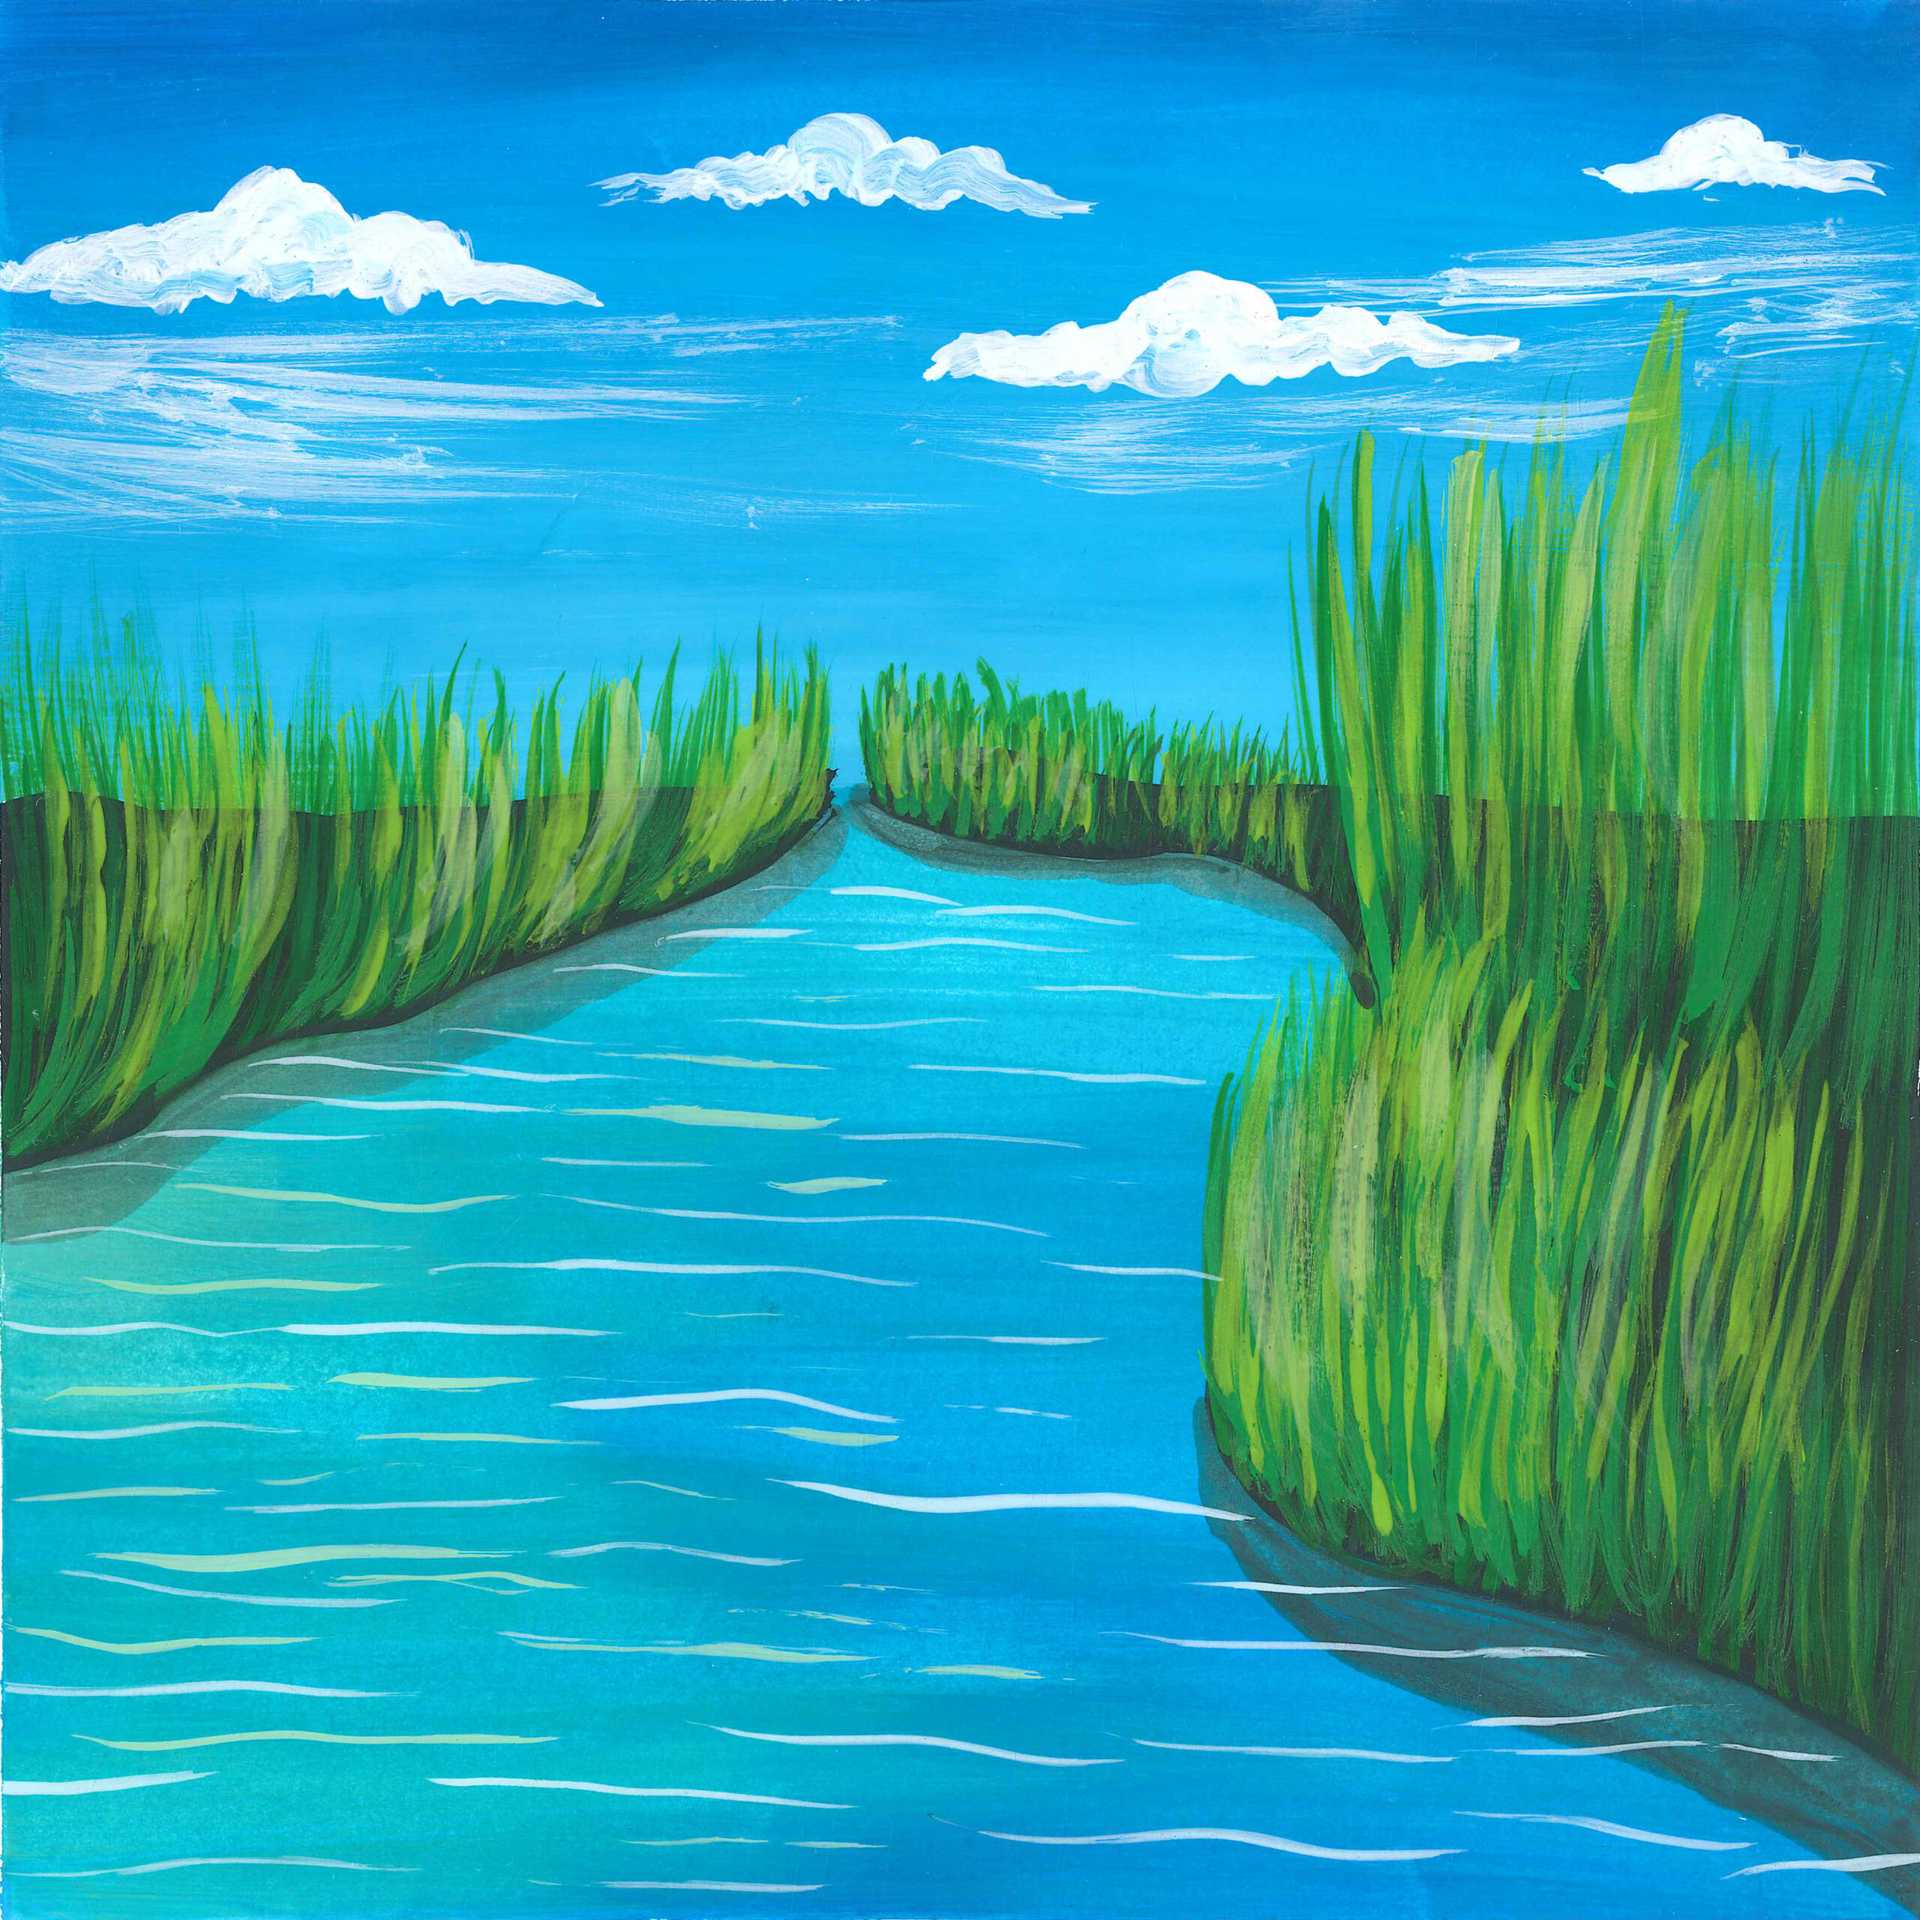 Photosynthesis in Pond - nature landscape painting - earth.fm